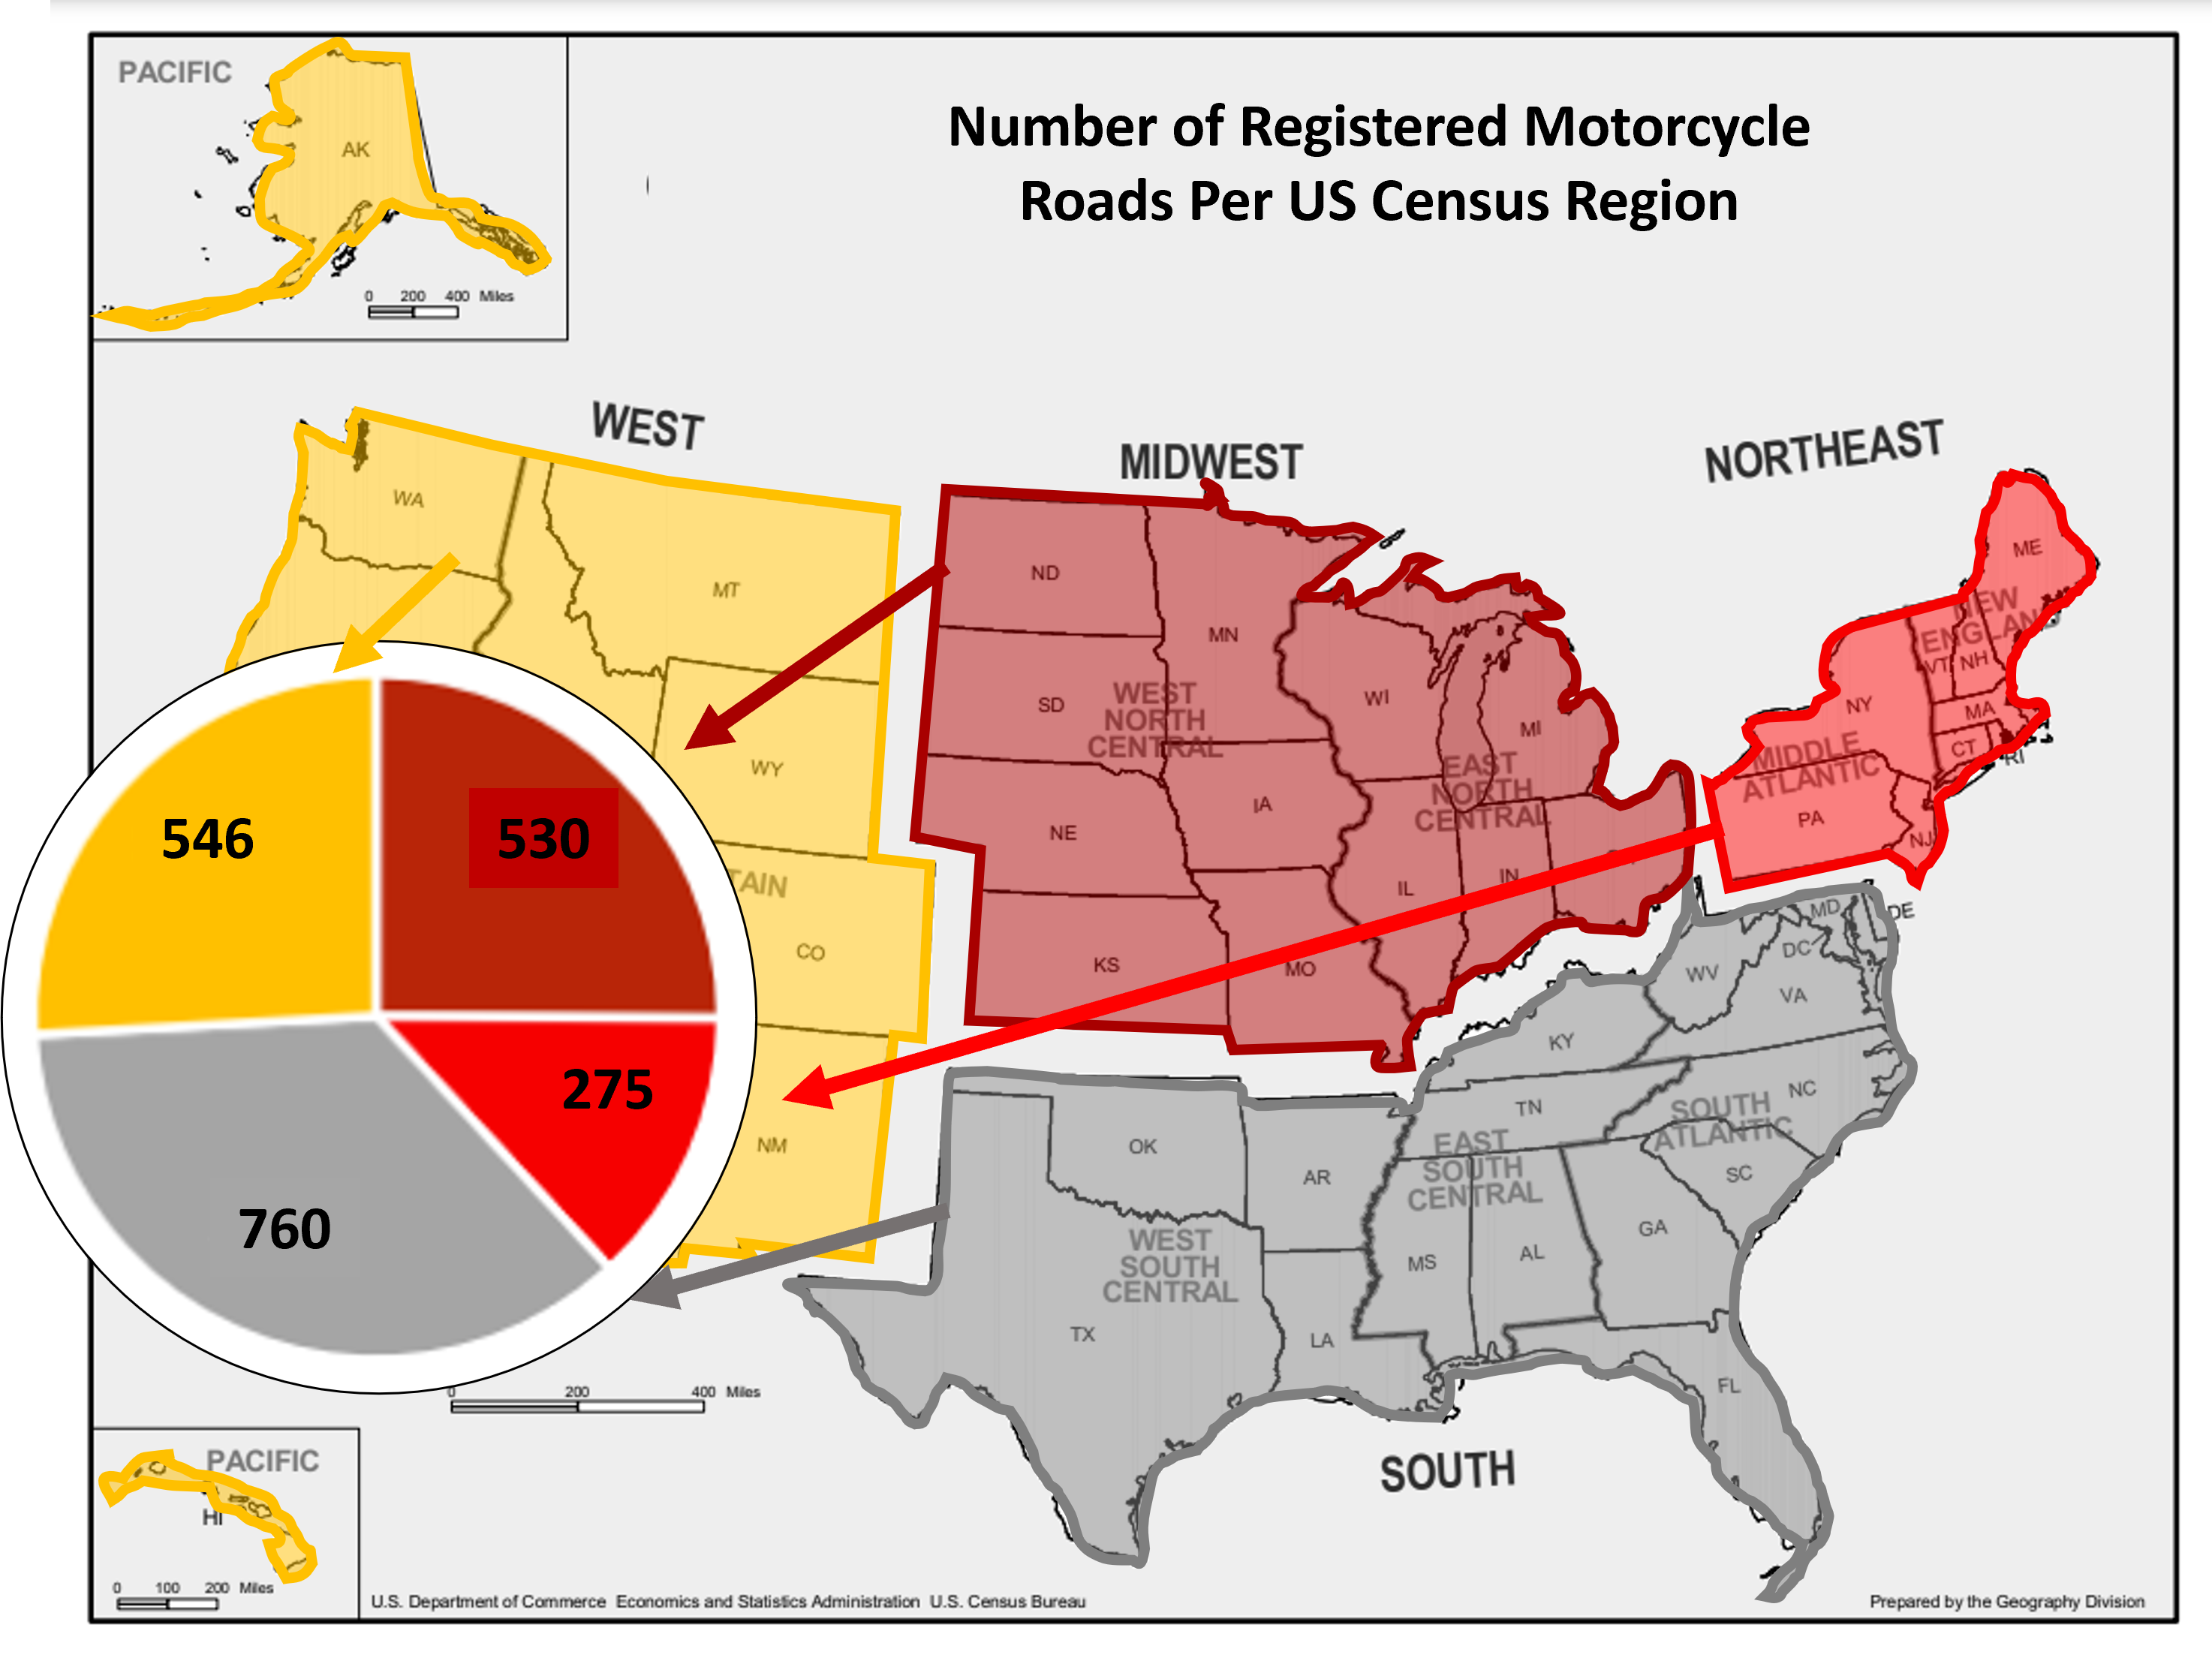 number of registered motorcycle roads in each of the four US regions